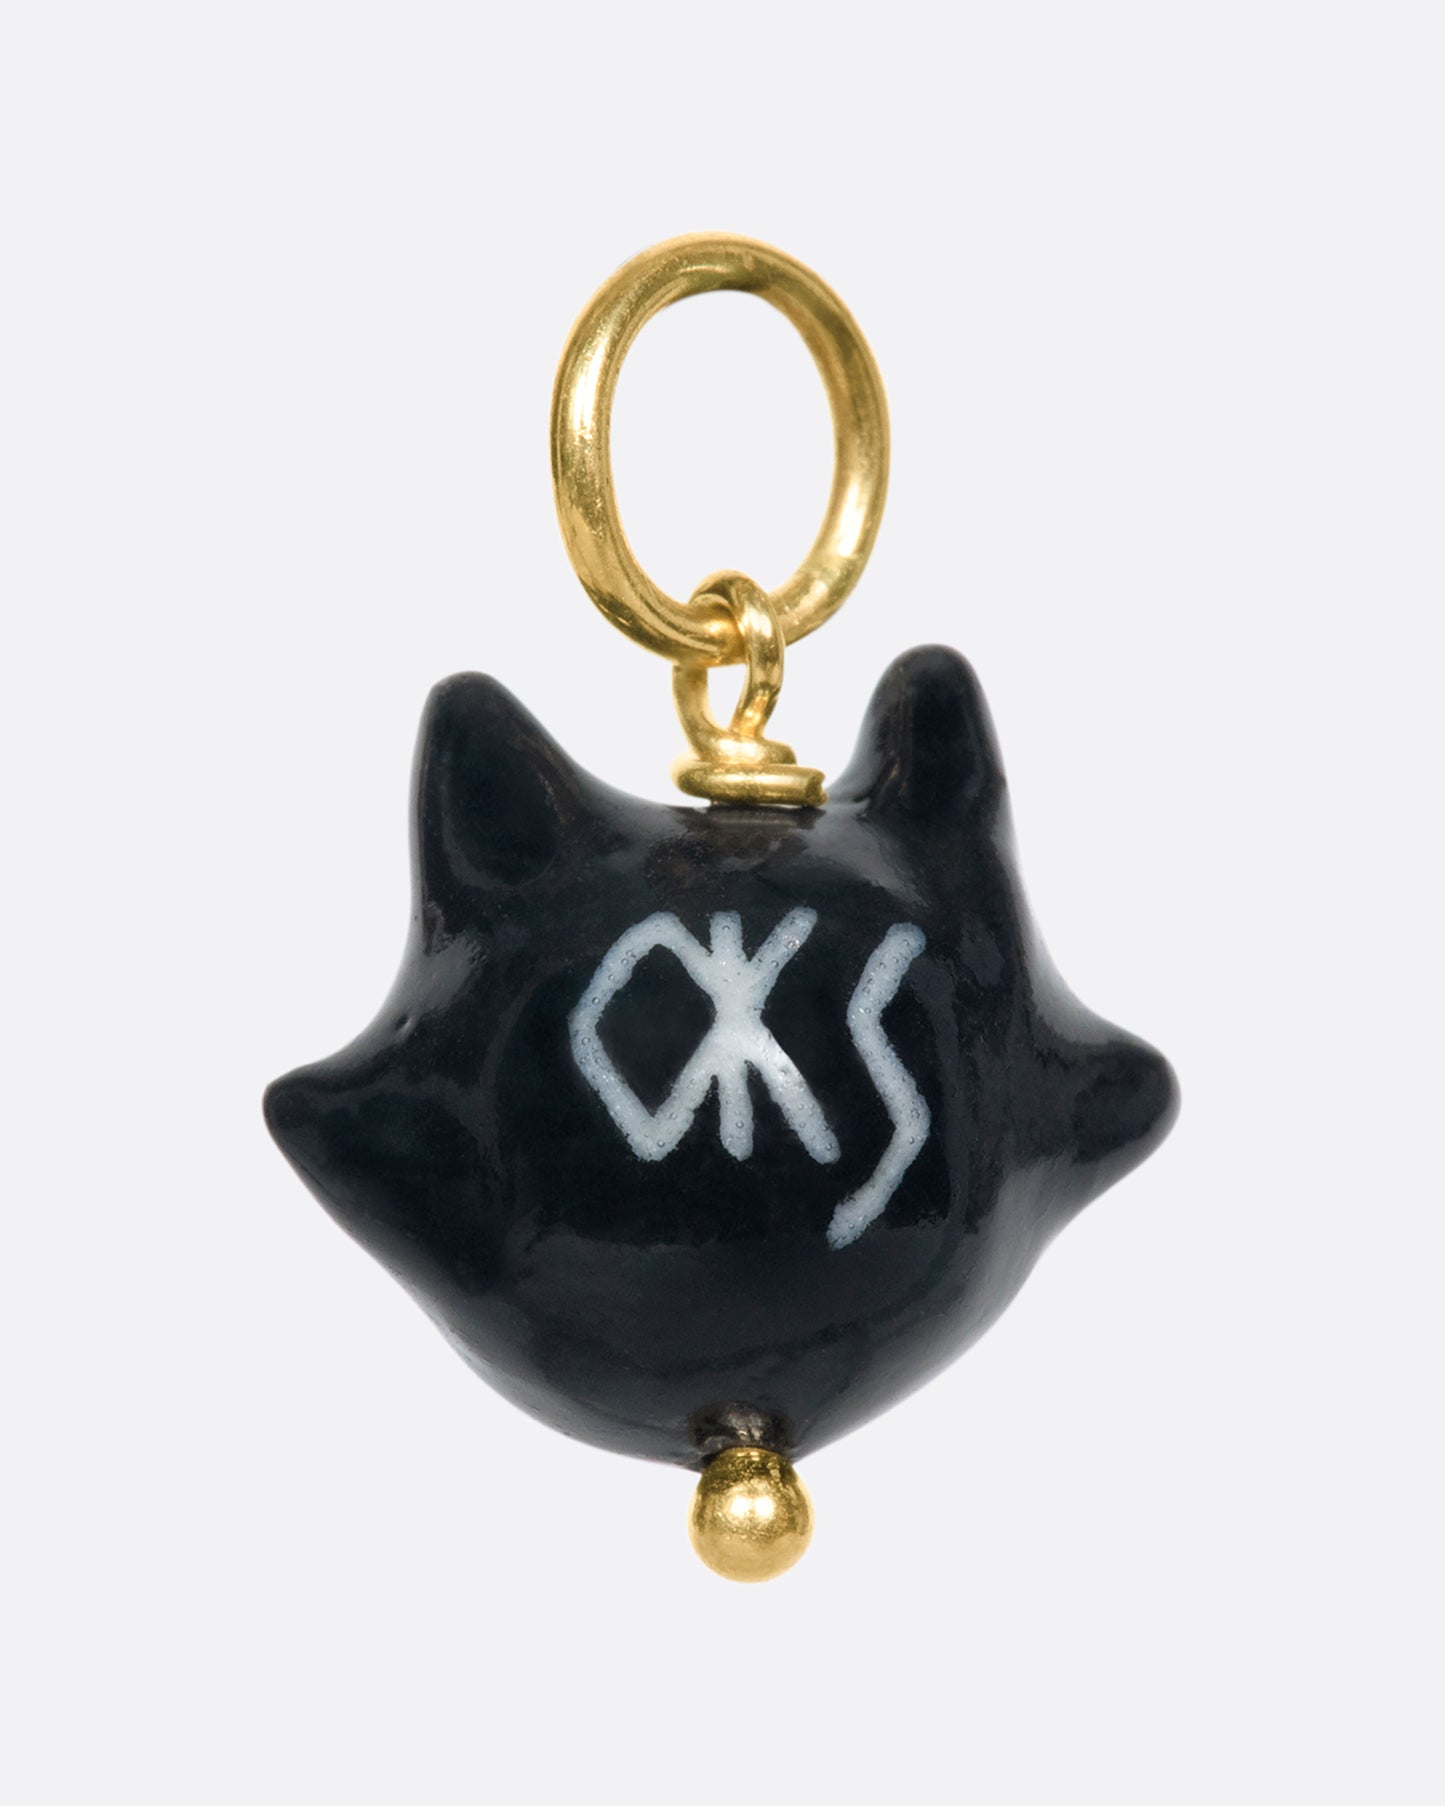 A handmade and painted porcelain Felix the Cat charm with a 14k gold bail